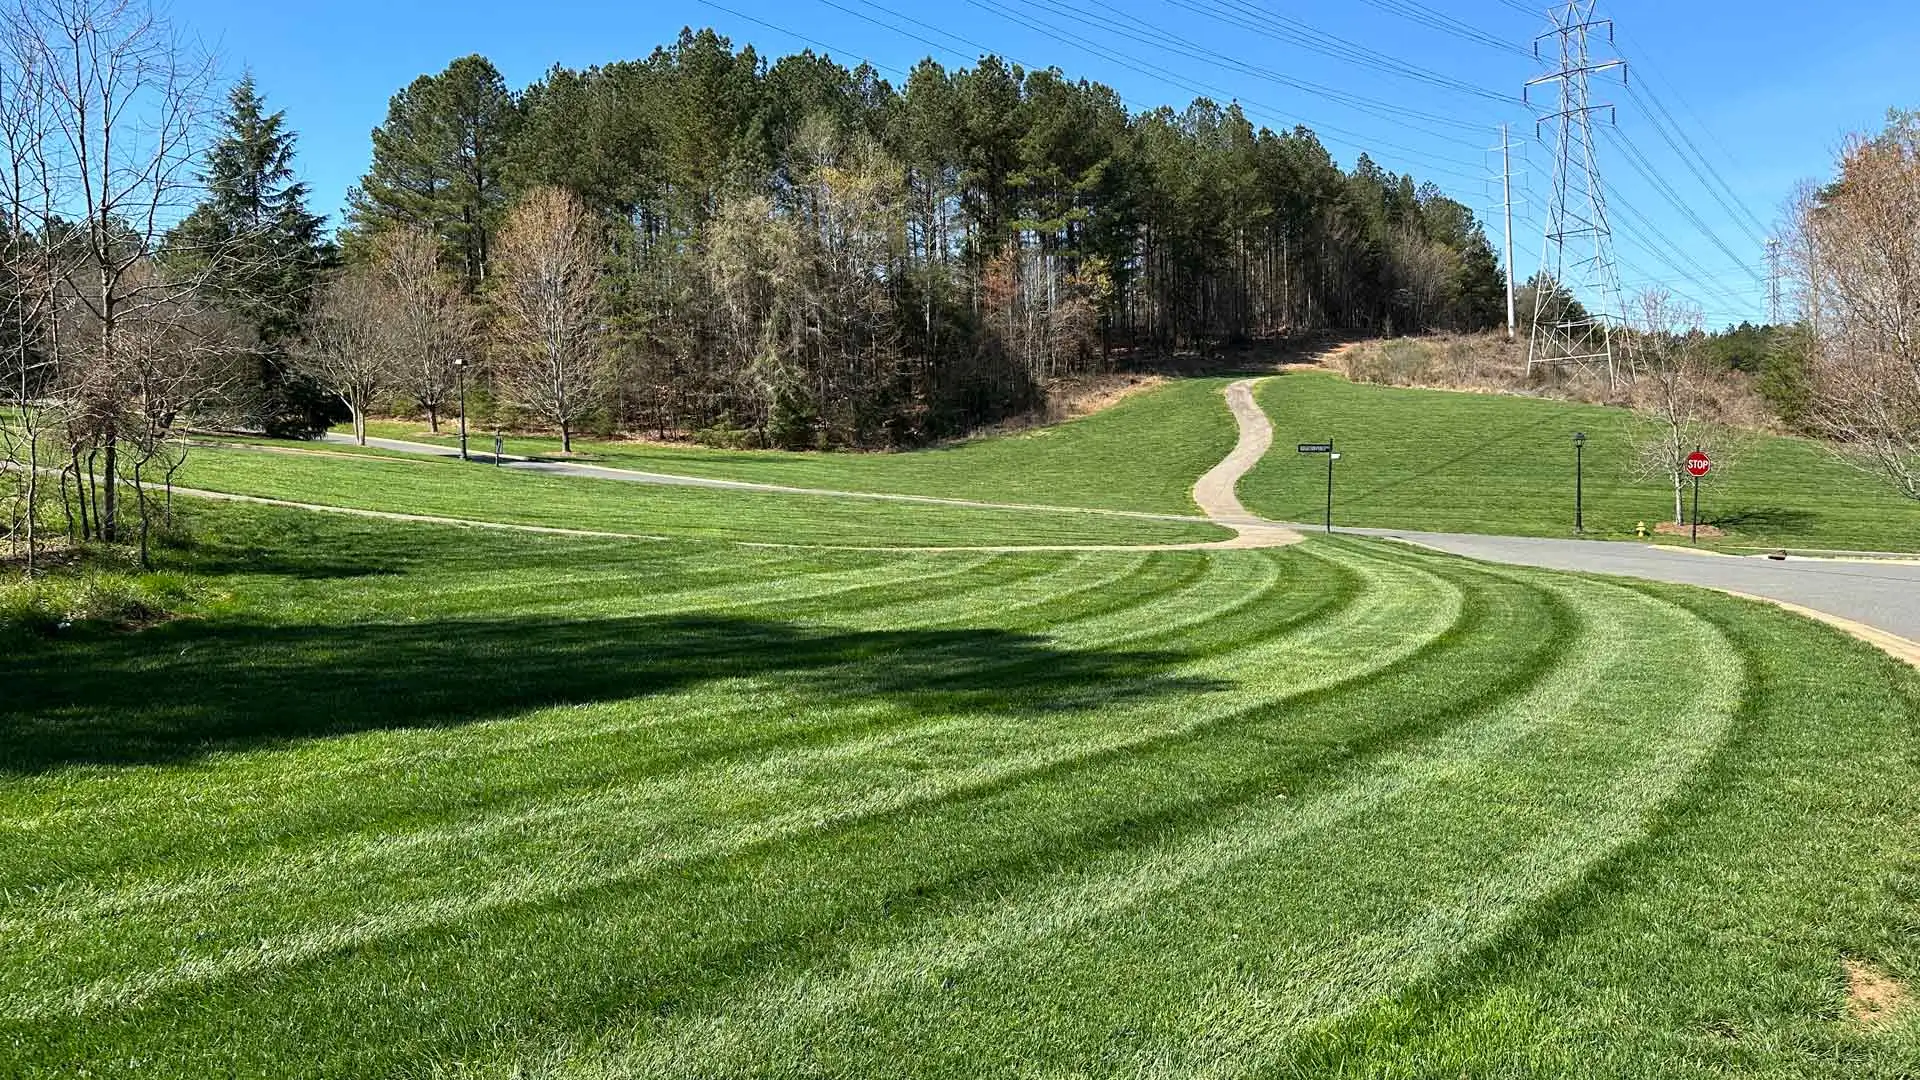 Mowed HOA property in Pineville, NC.